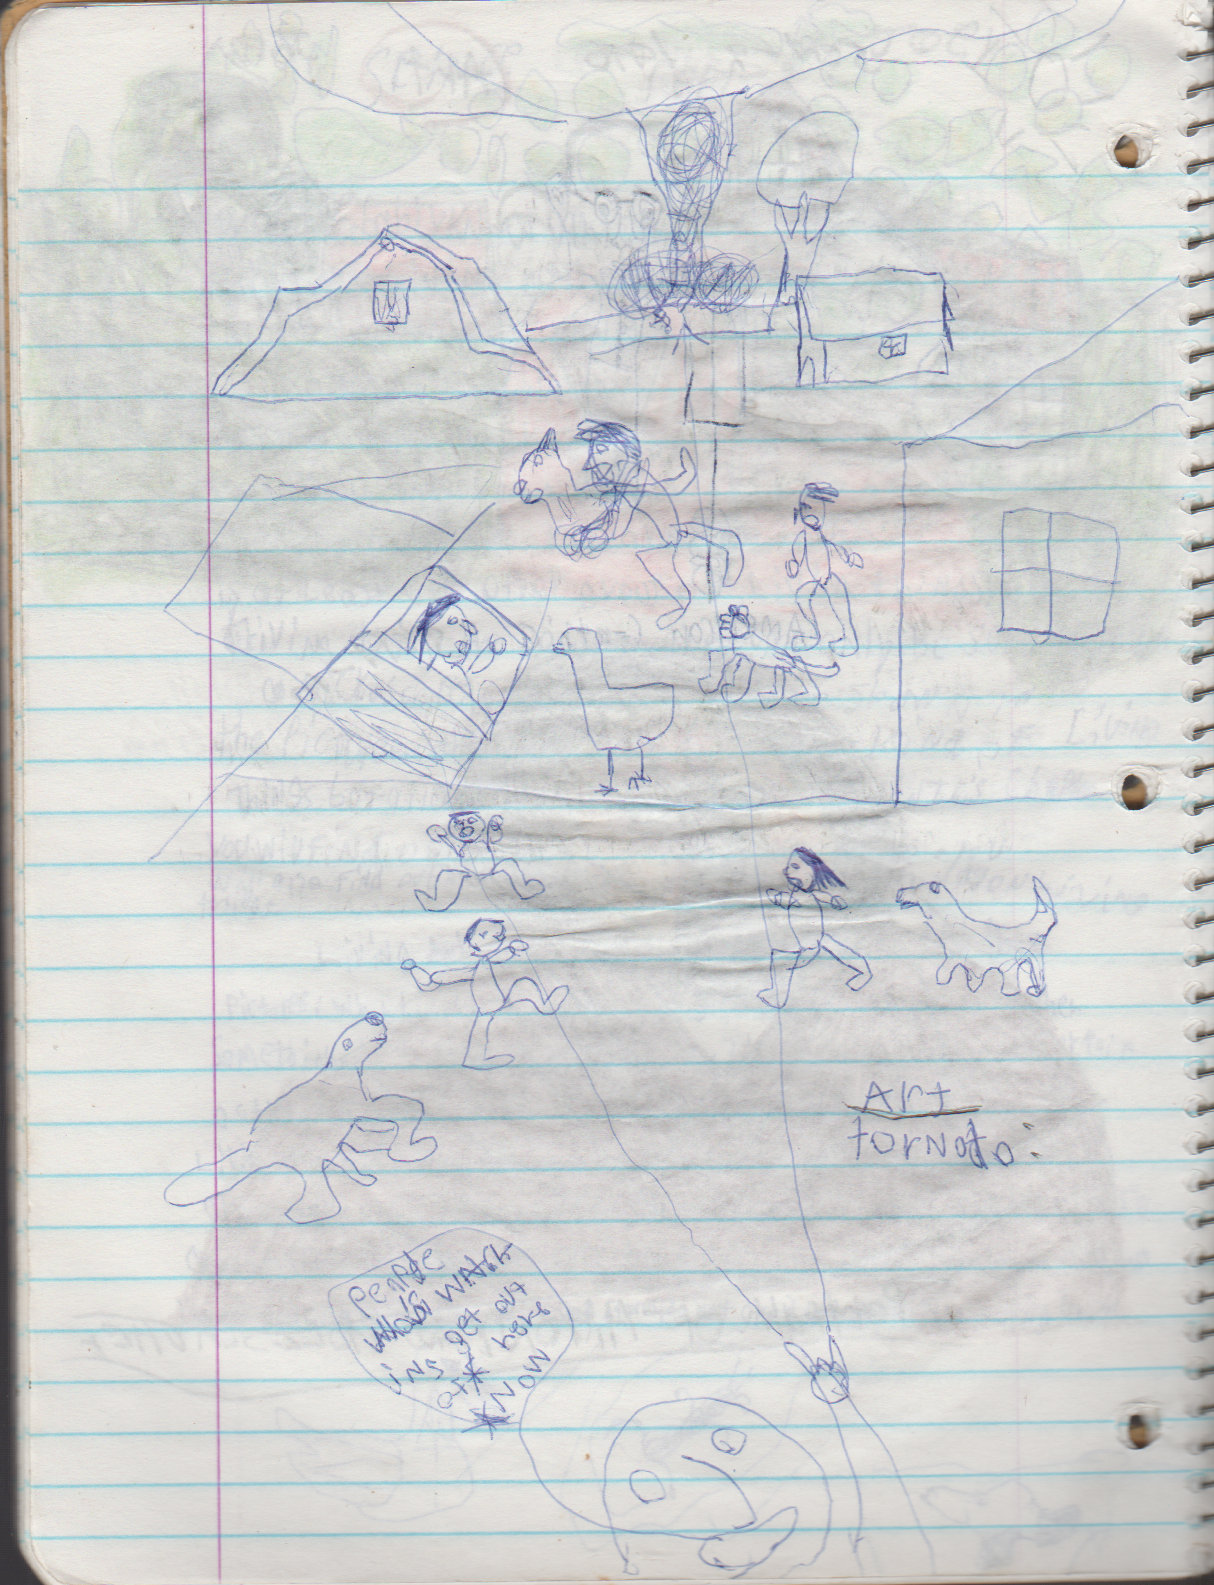 1996-08-18 - Saturday - 11 yr old Joey Arnold's School Book, dates through to 1998 apx, mostly 96, Writings, Drawings, Etc-017.png